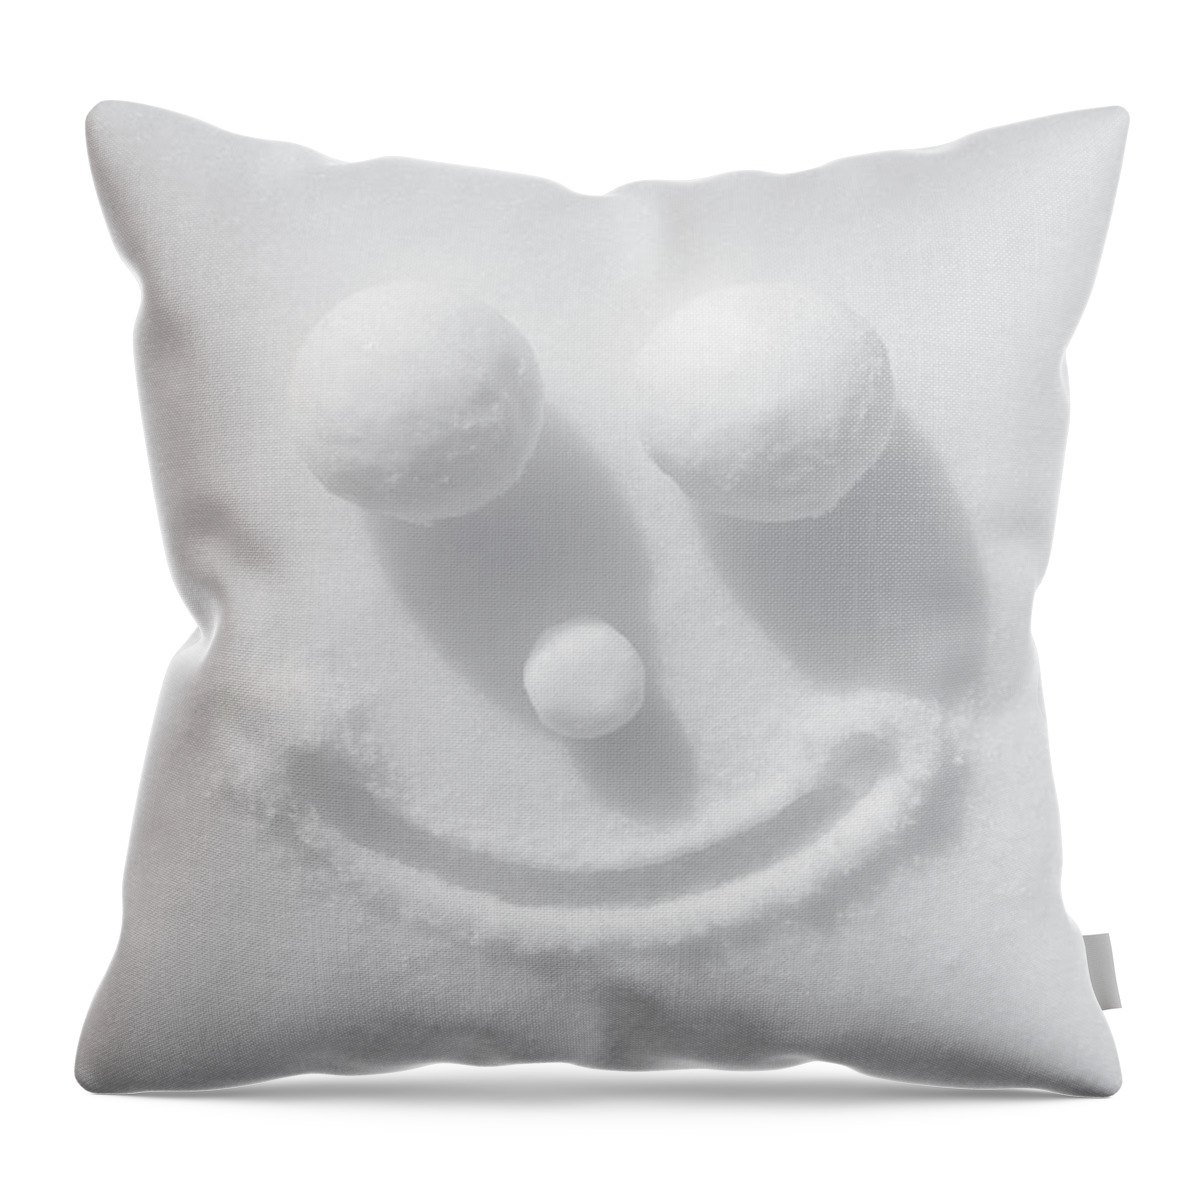 People Throw Pillow featuring the photograph Face Of Snow by Malerapaso